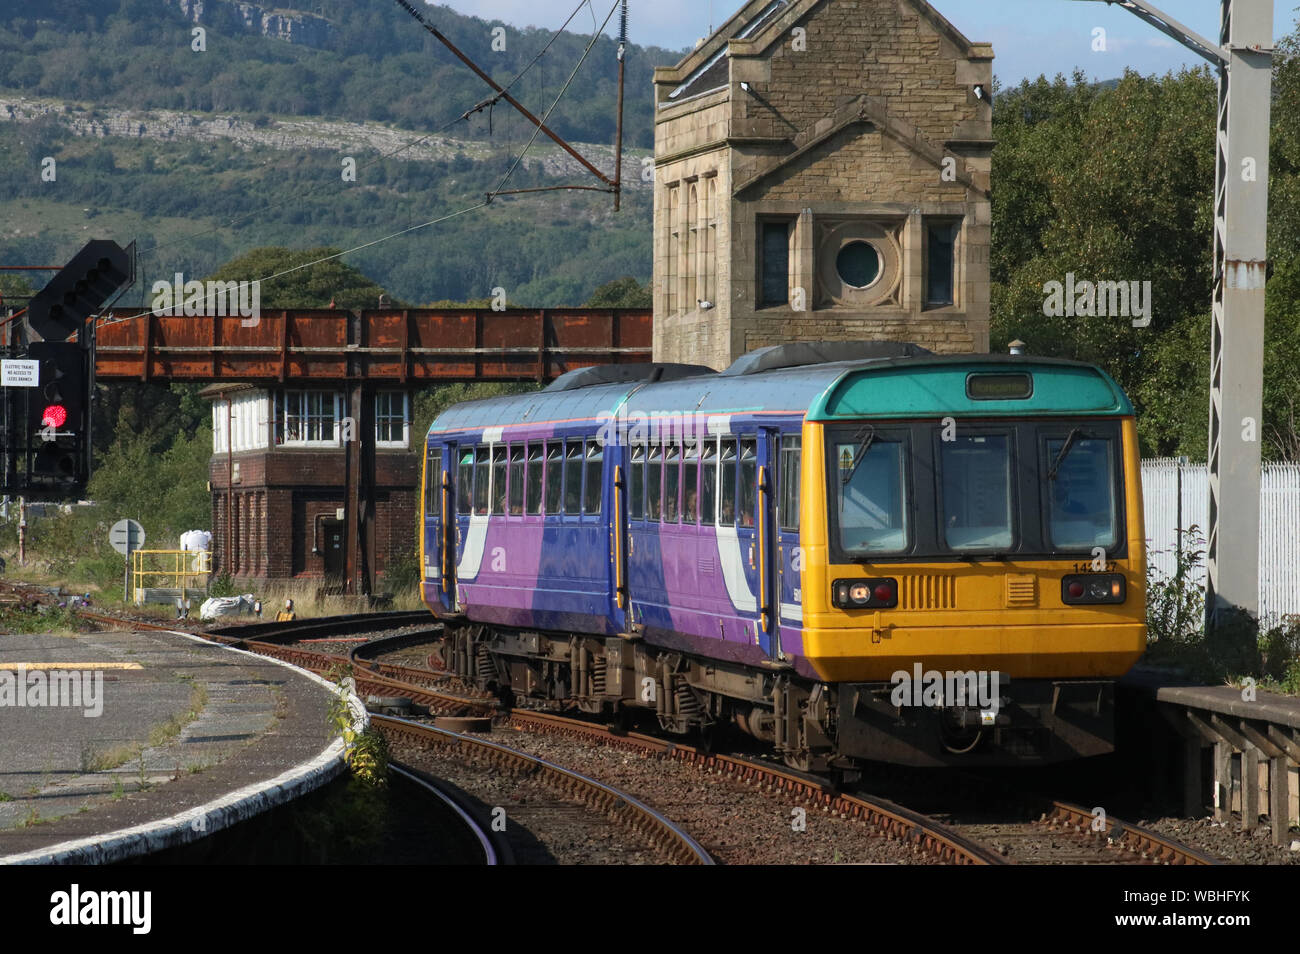 BREL Pacer class 142 diesel multiple unit passenger train in old Northern livery arriving at Carnforth railway station on Monday 26th August 2019. Stock Photo